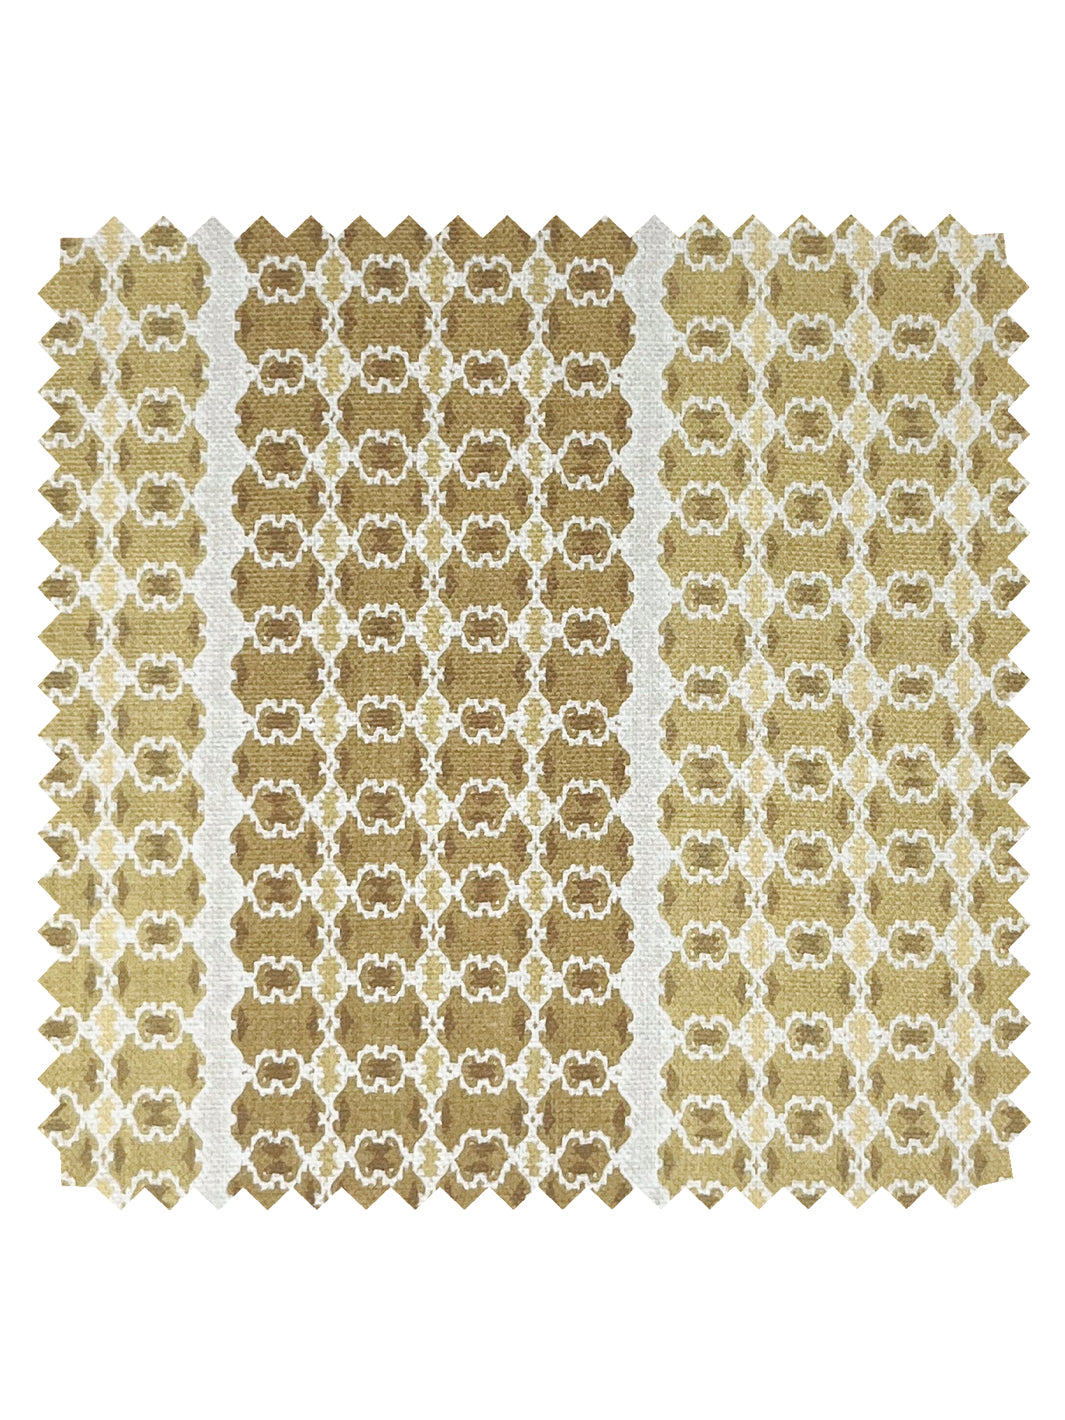 'Medallion Stripe' Linen Fabric by Nathan Turner - Gold